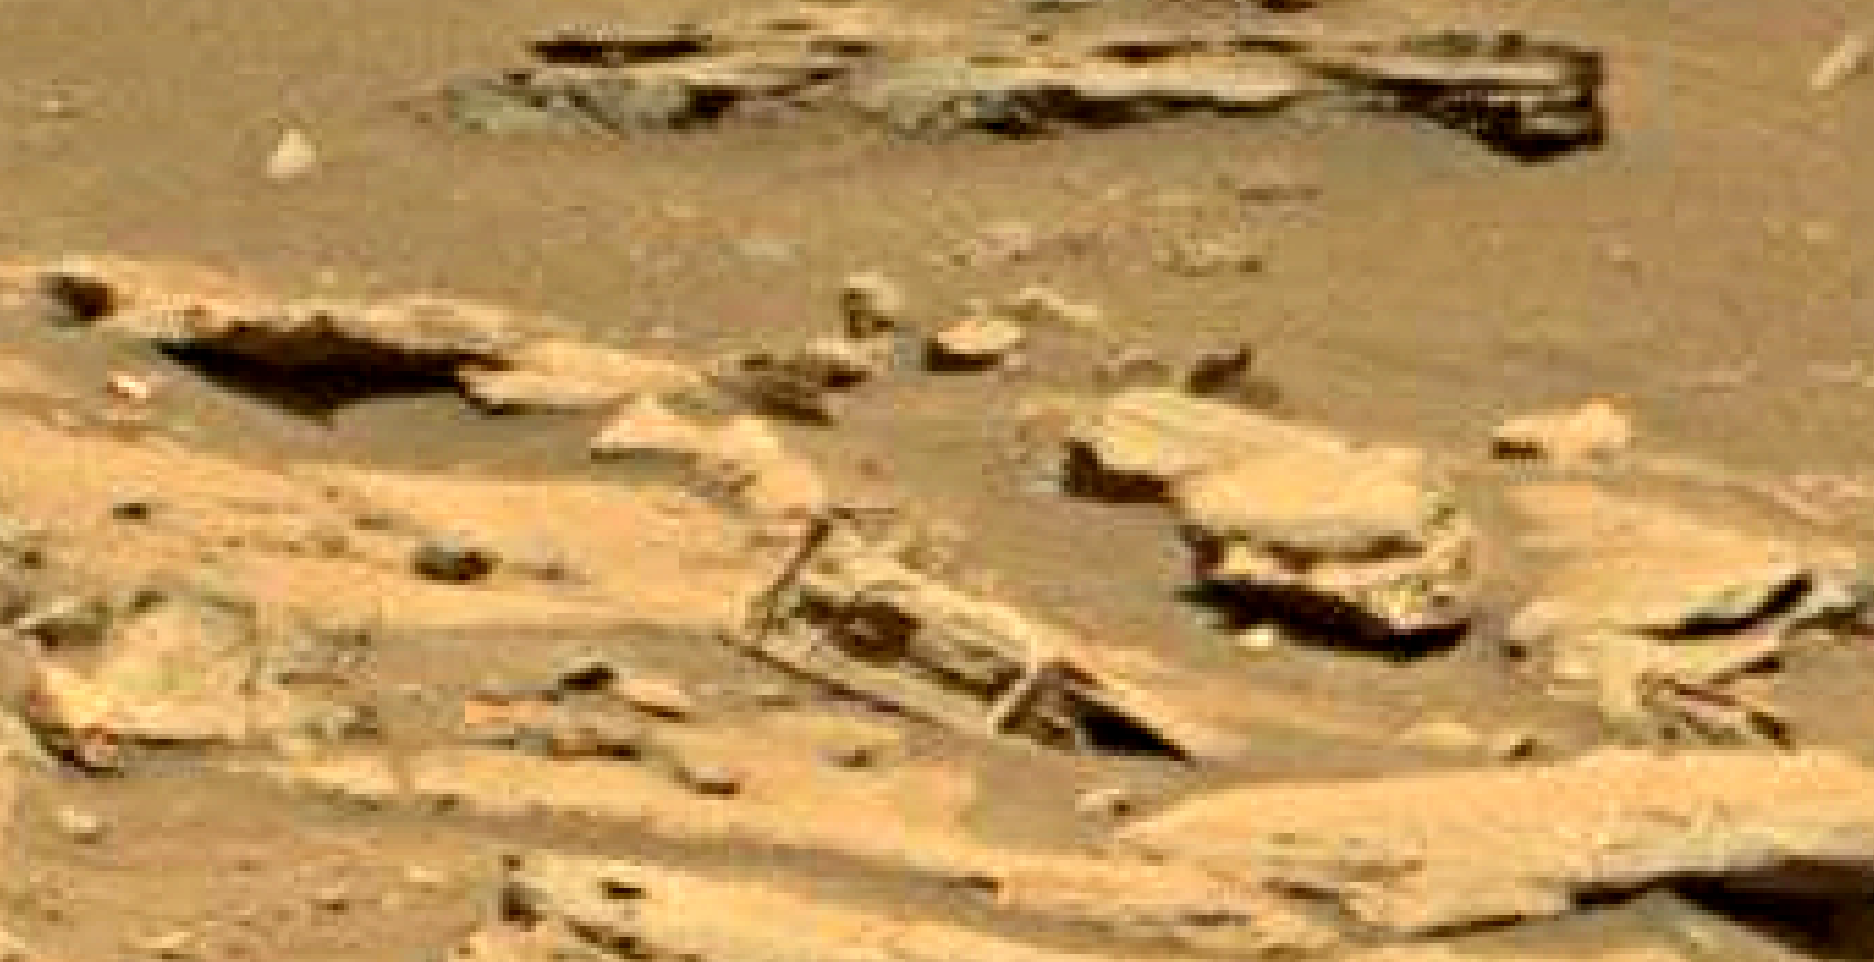 mars sol 1353 anomaly-artifacts 9c was life on mars